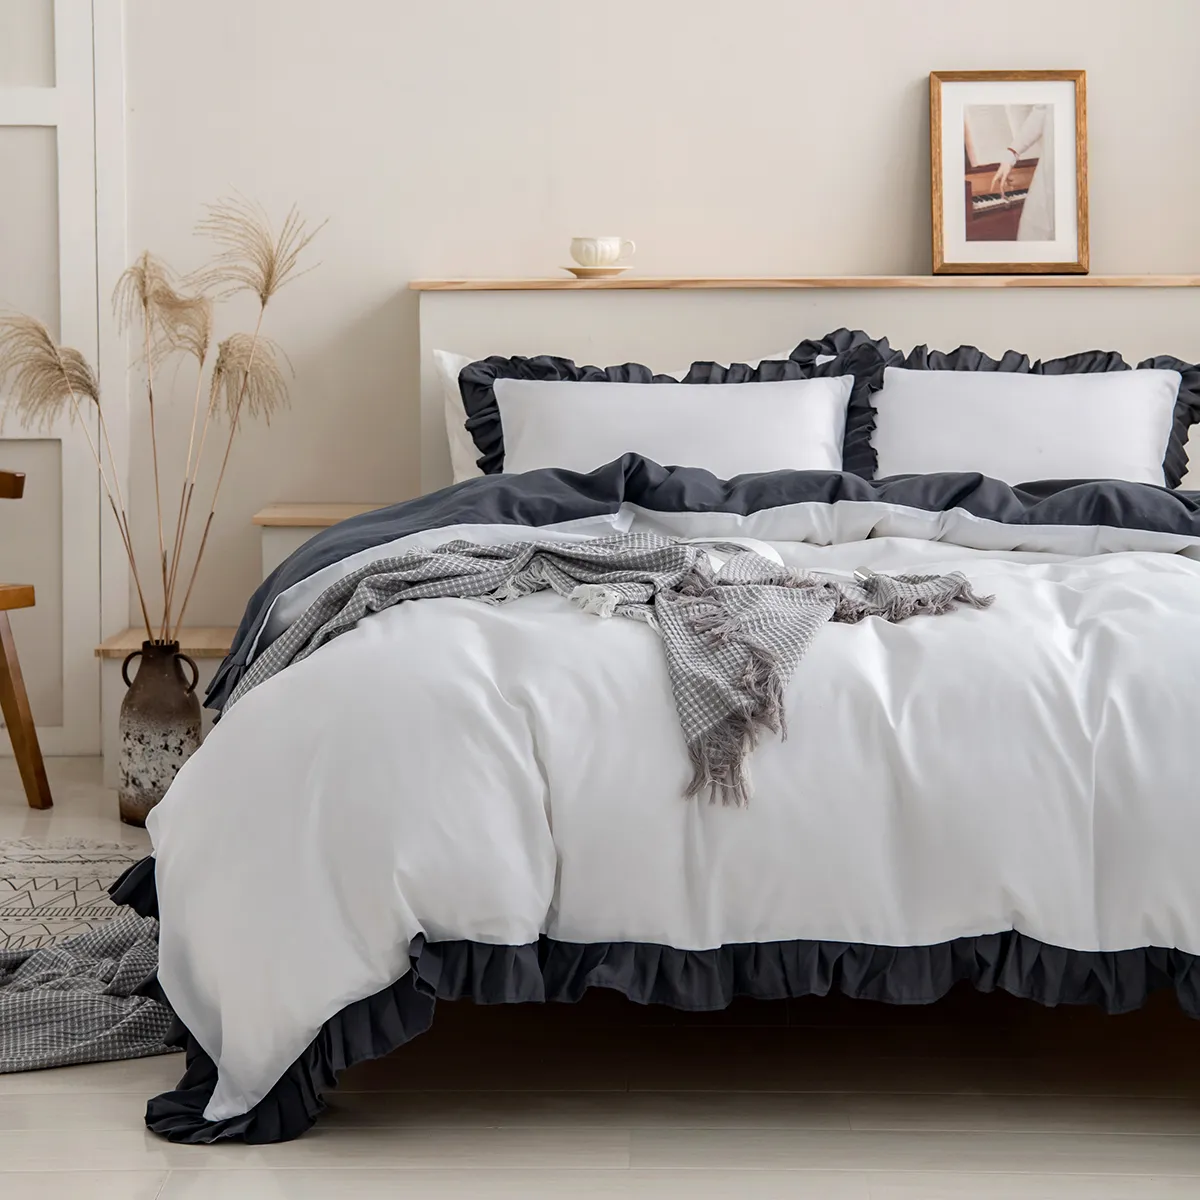 2/3pcs Soft and Comfortable Solid Color Bedding Set,including Duvet Cover and Pillowcases WARMGREY big image 1